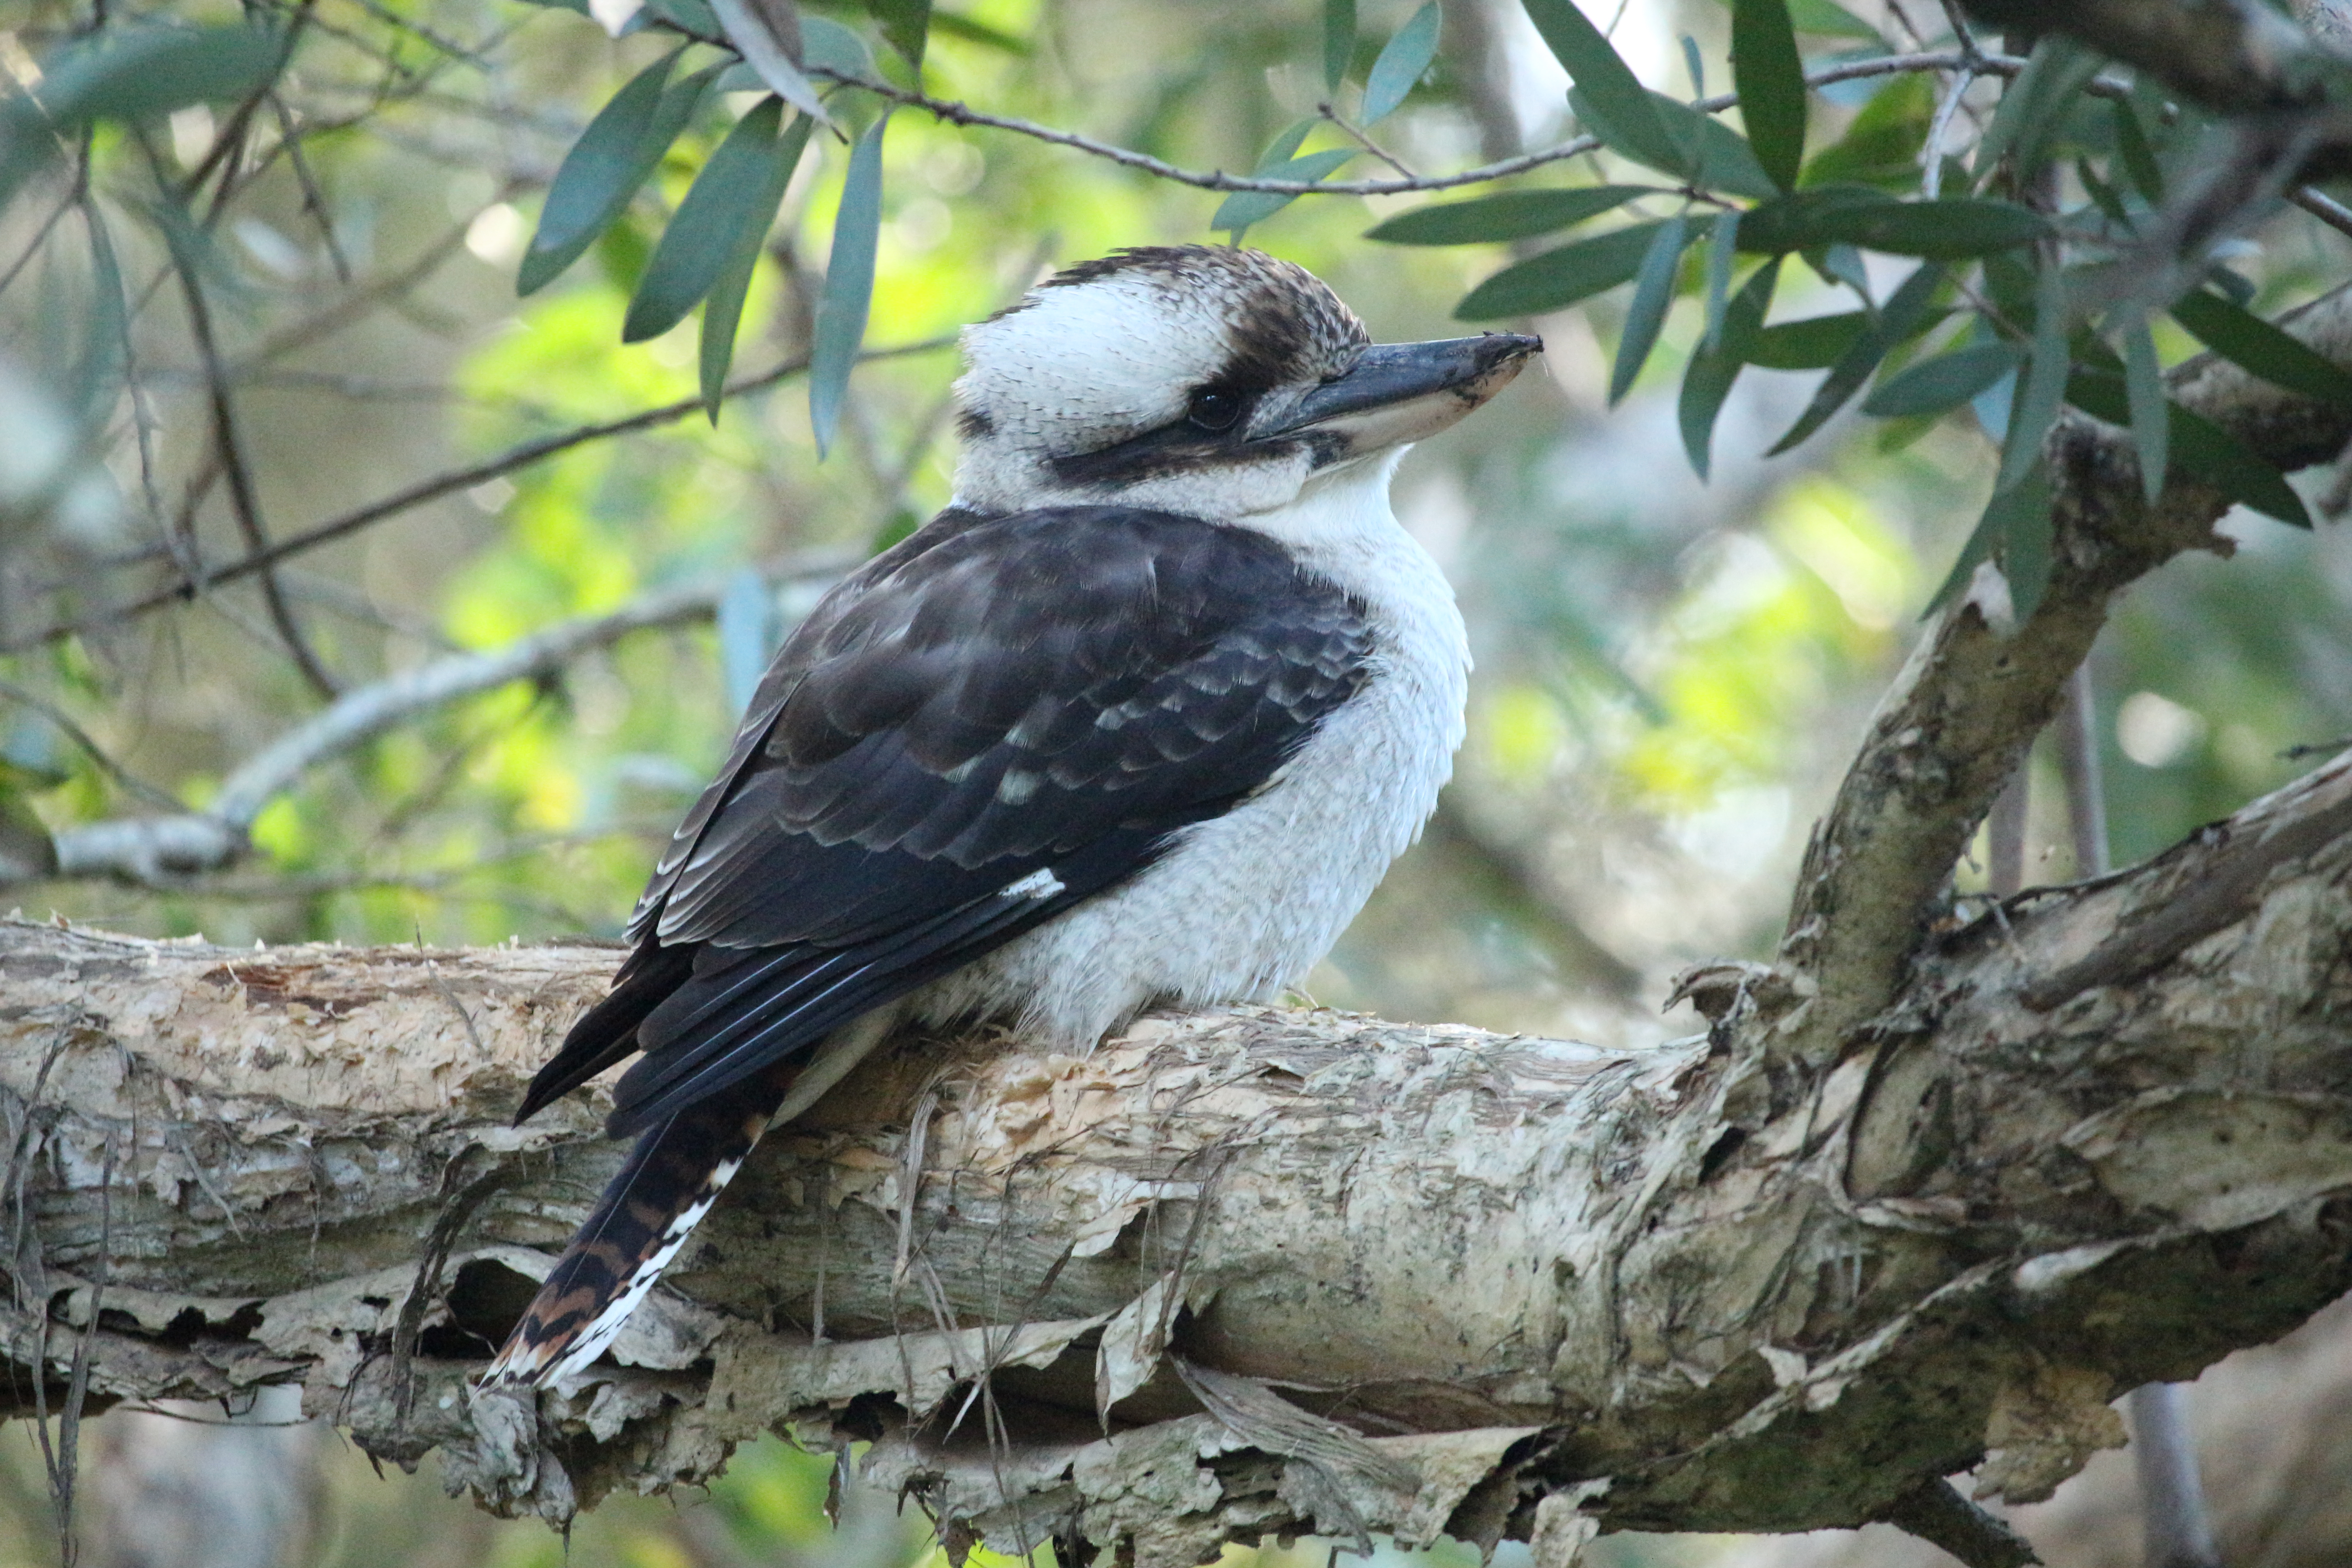 Close up of a kookaburra perched on a tree branch.